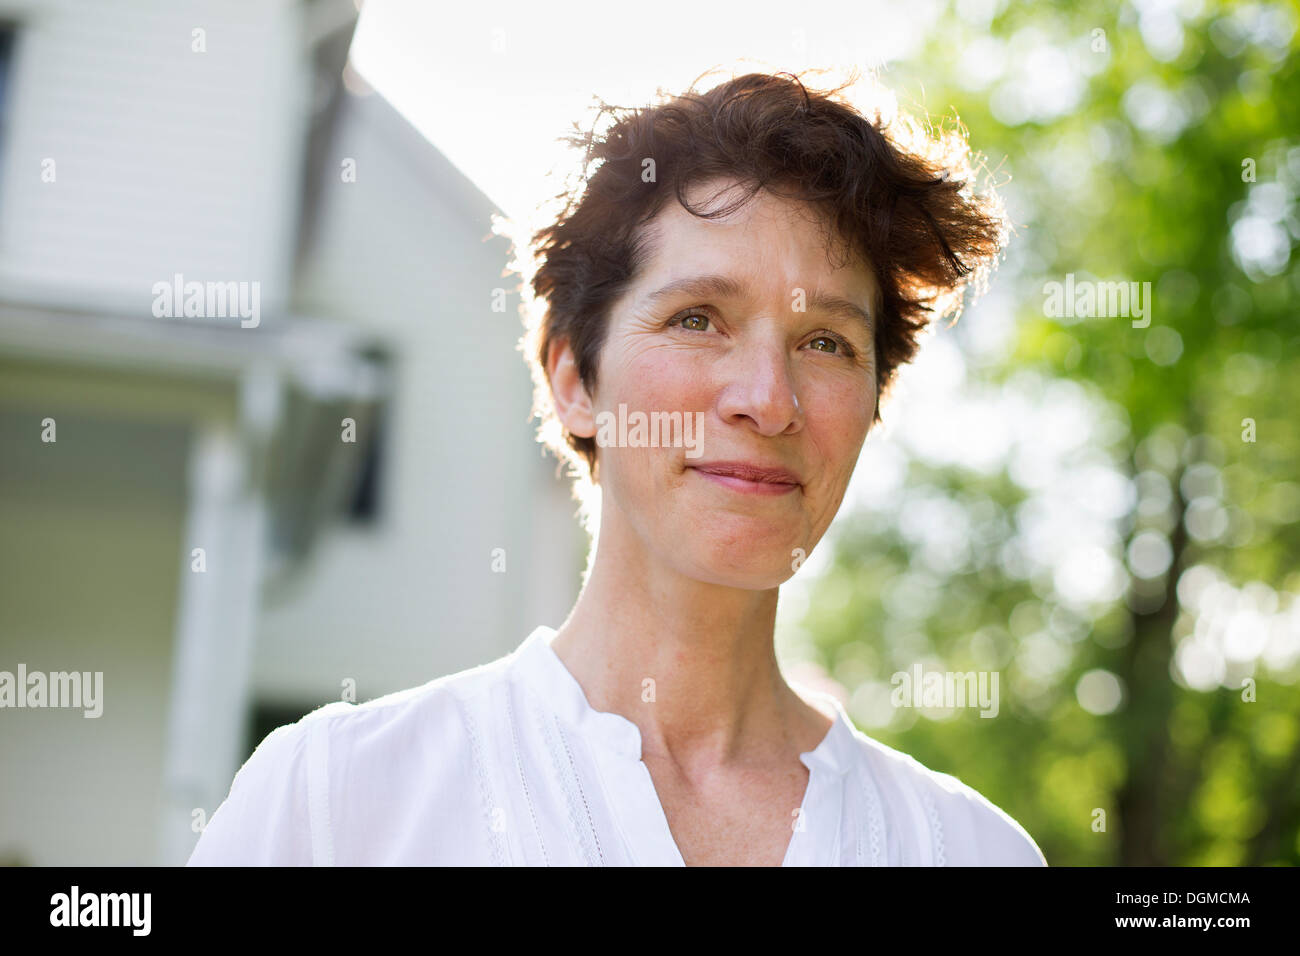 Organic farm. Summer party. A mature woman smiling. Stock Photo